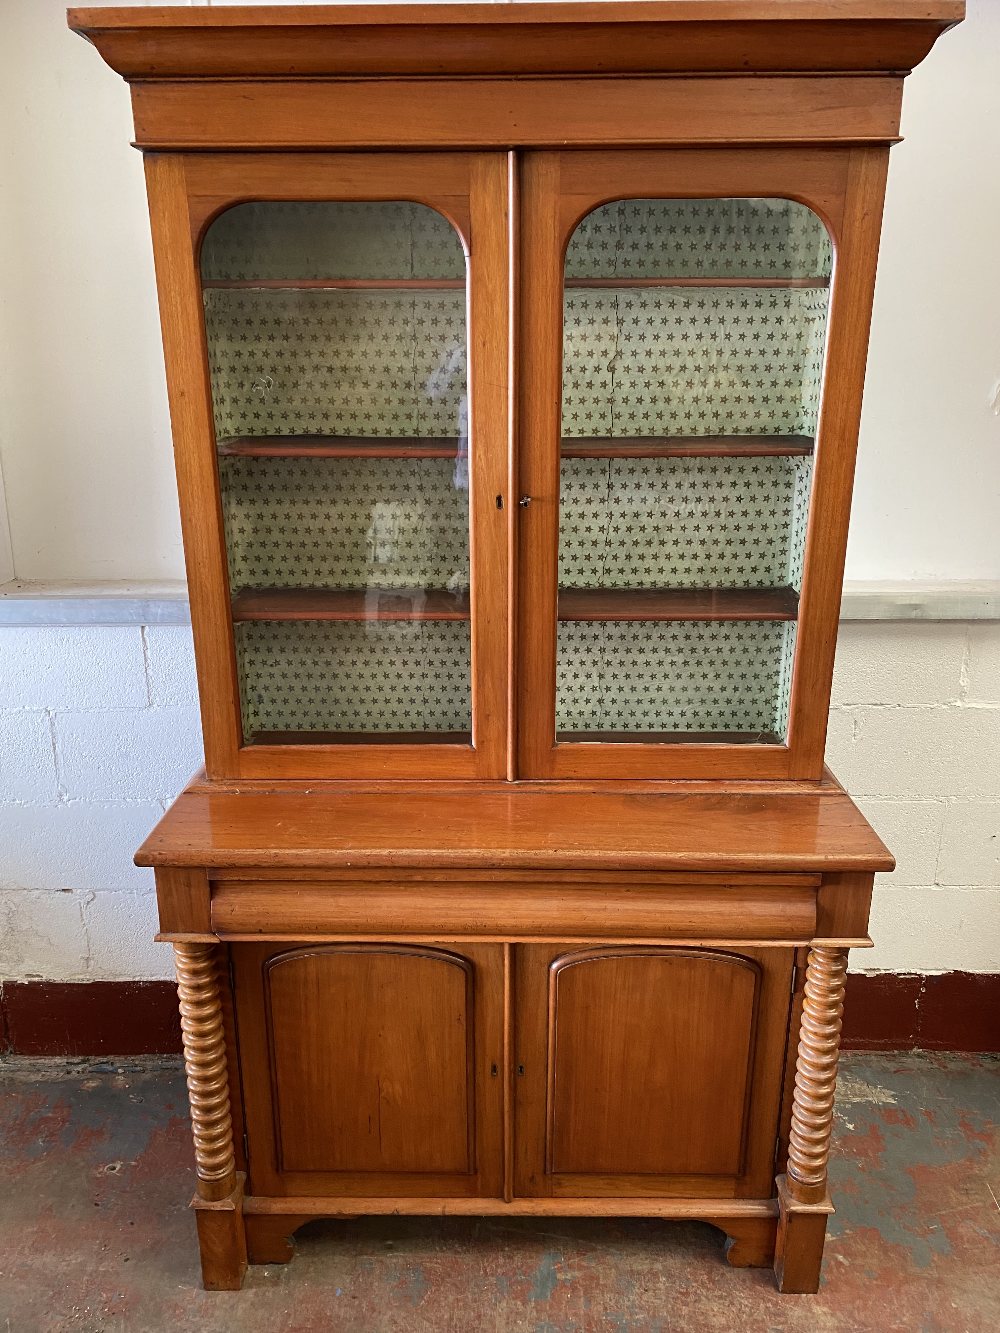 ANTIQUE MAHOGANY BOOKCASE CUPBOARD or 'Cwpwrdd Gwydr', having a base section with turned pillars and - Image 2 of 7